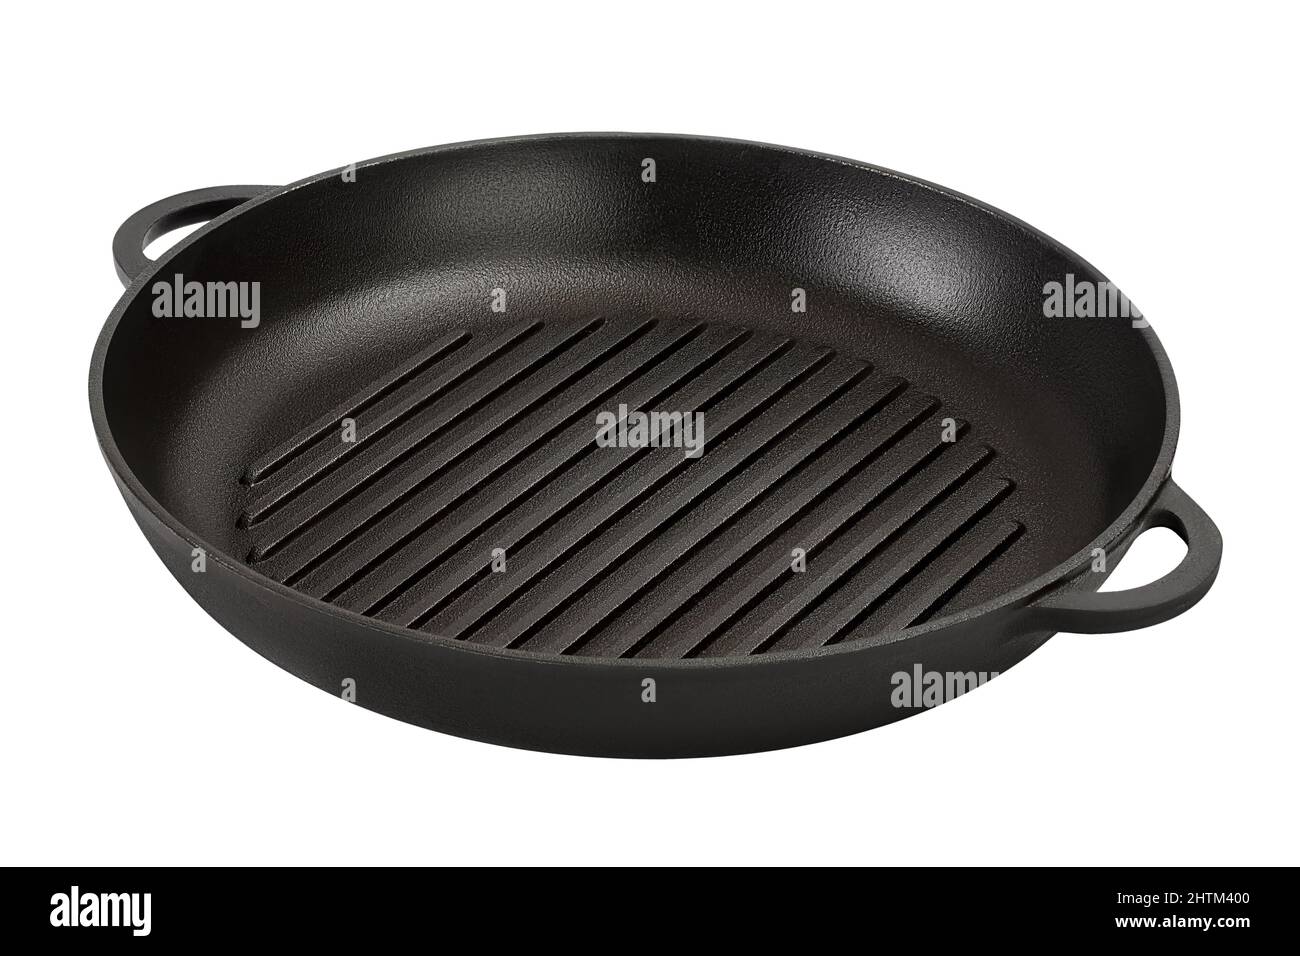 https://c8.alamy.com/comp/2HTM400/empty-cast-iron-grill-frying-pan-isolated-on-white-background-with-clipping-path-2HTM400.jpg